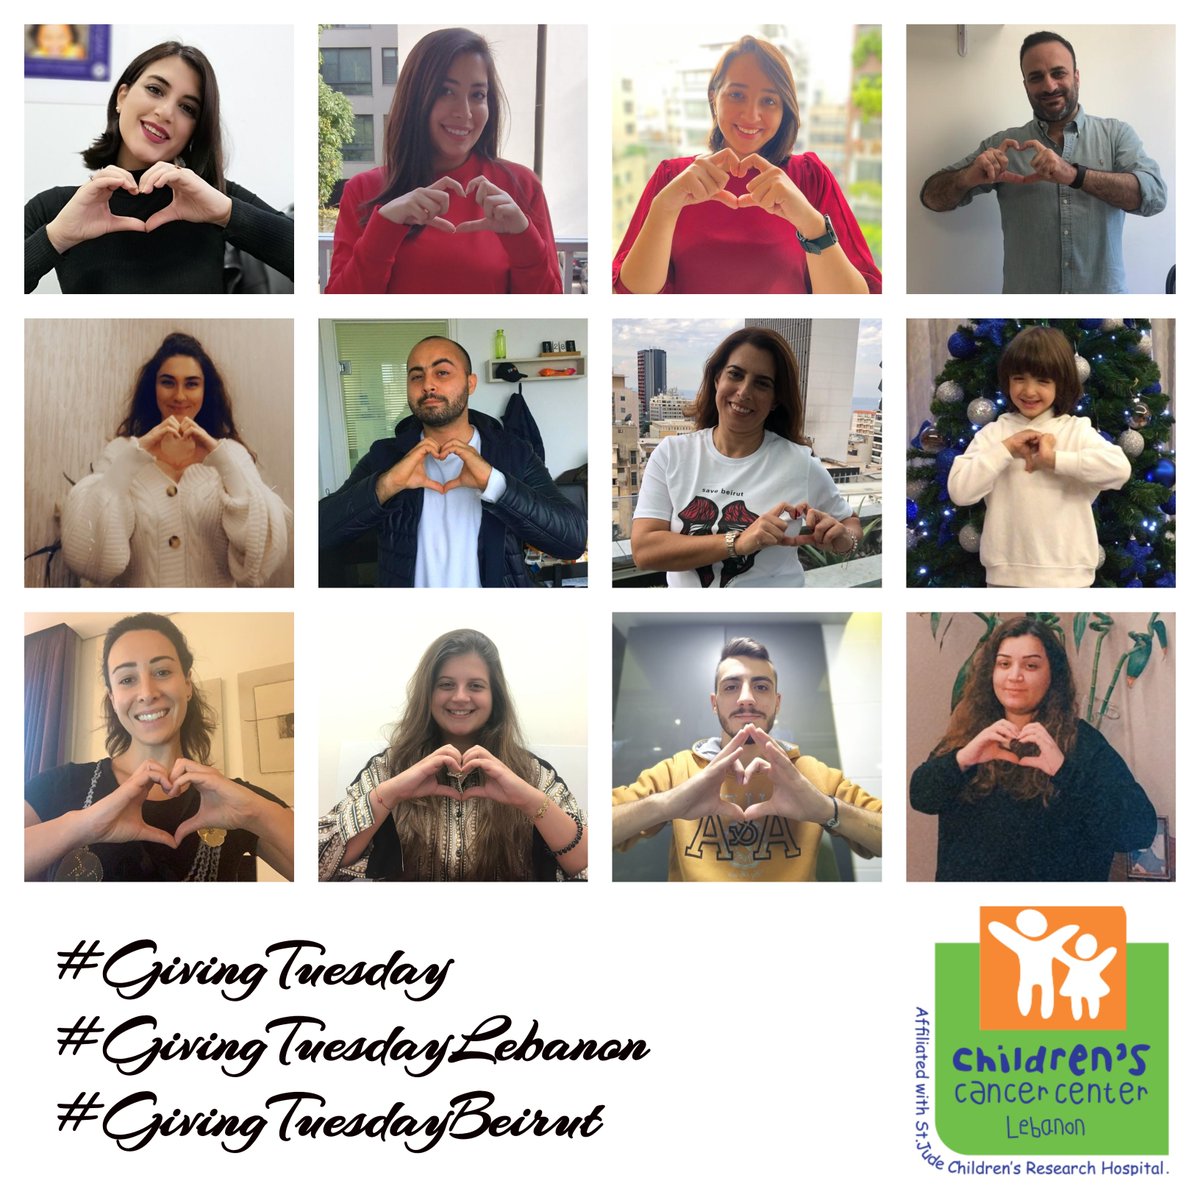 LOVE LEBANON CHALLENGE

Post photos of your friends, classmates, colleagues & family in a collage.
Show your love!
Tag us.

#LoveLebanonChallenge #GivingTuesday #GivingTuesdayLebanon #GivingTuesdayBeirut @GivingTuesdayLB #CCCL #iLoveCCCL #SavingLives_CelebratingHope